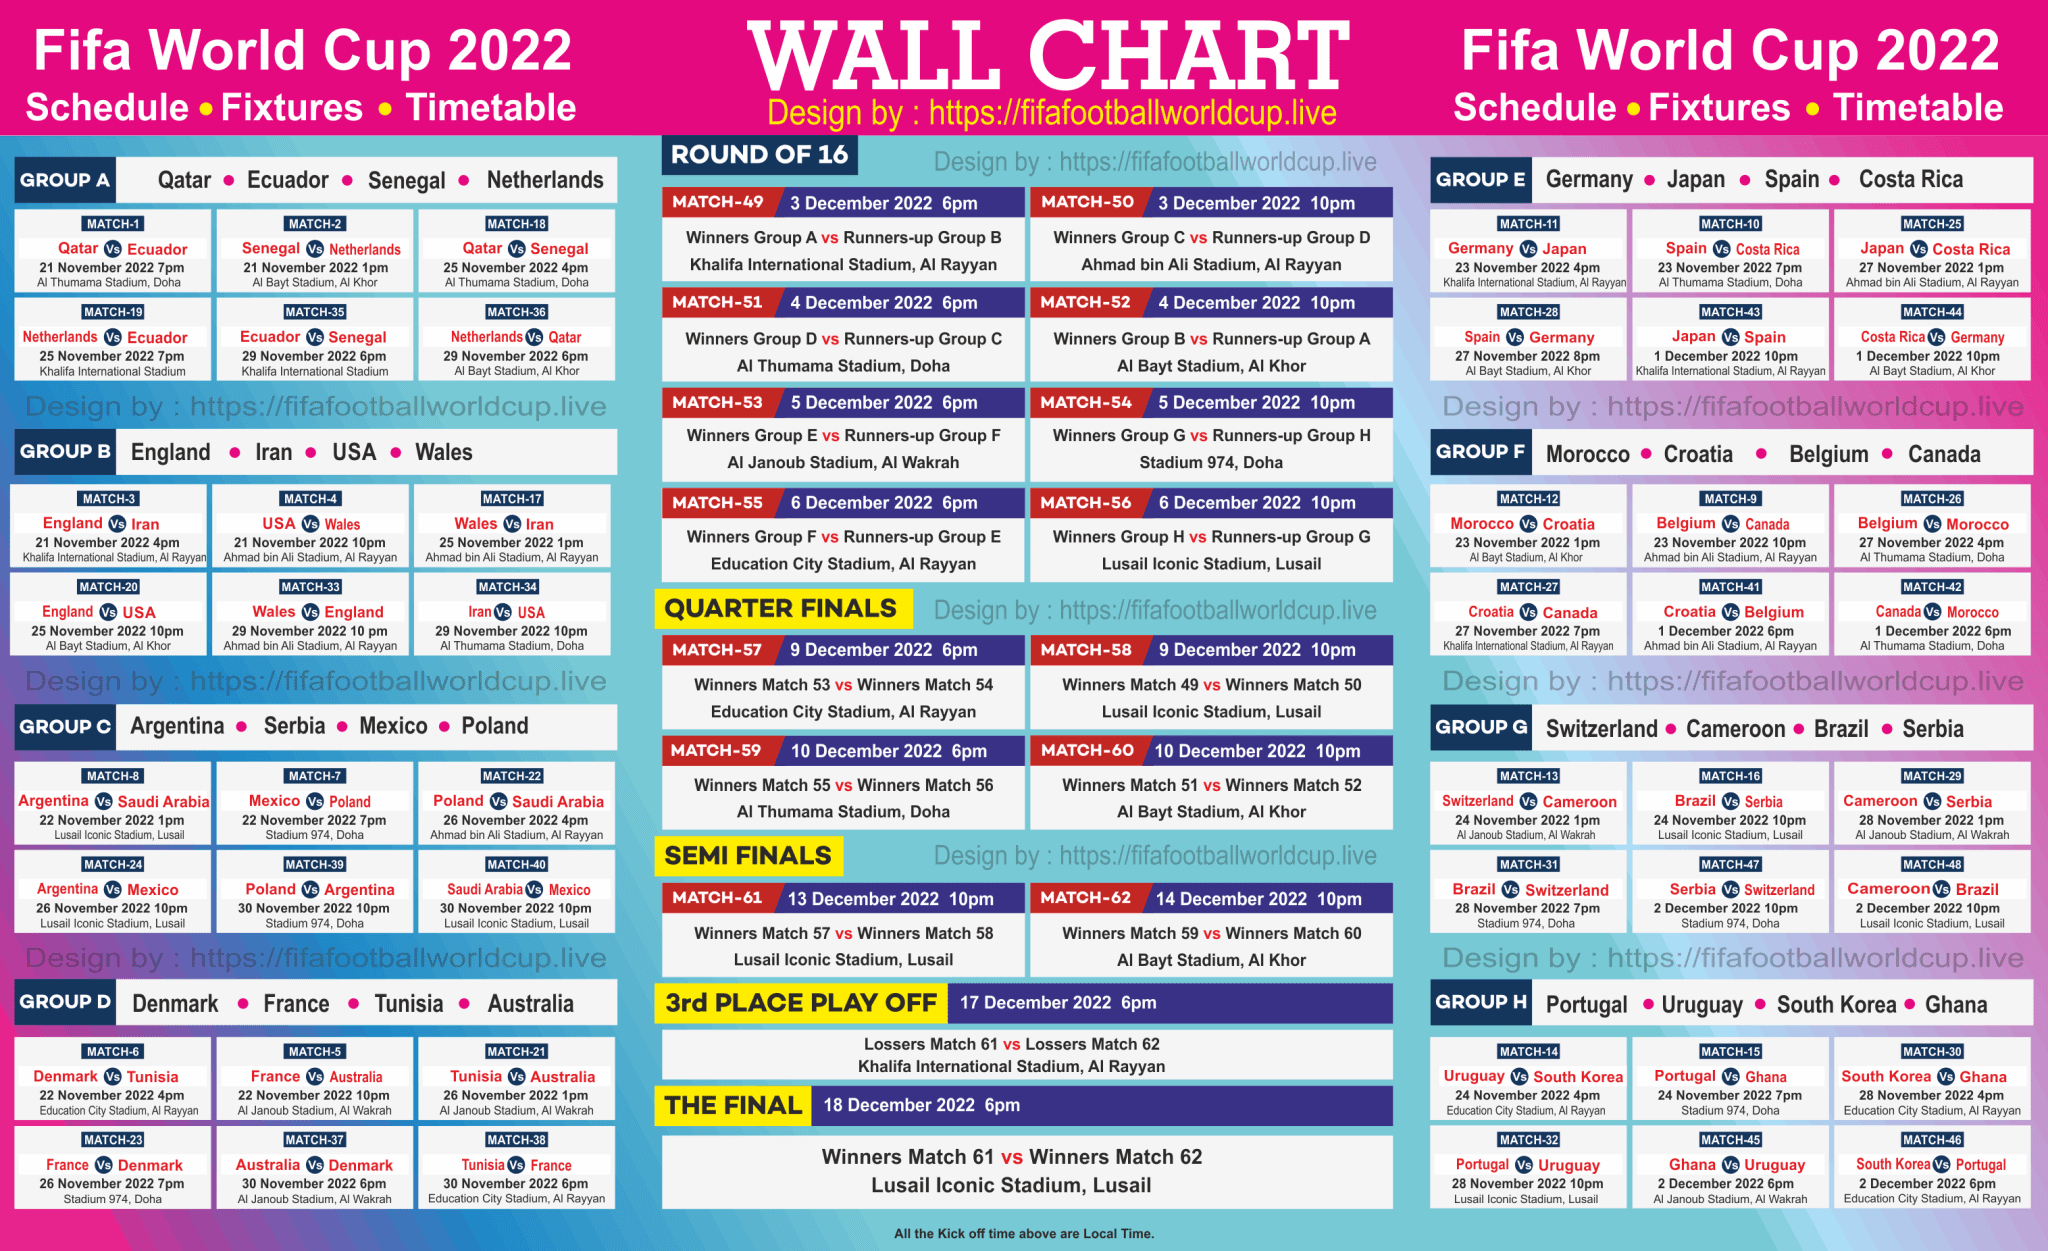 Fifa World Cup Wall Chart 2022 Download Free In Hd Image